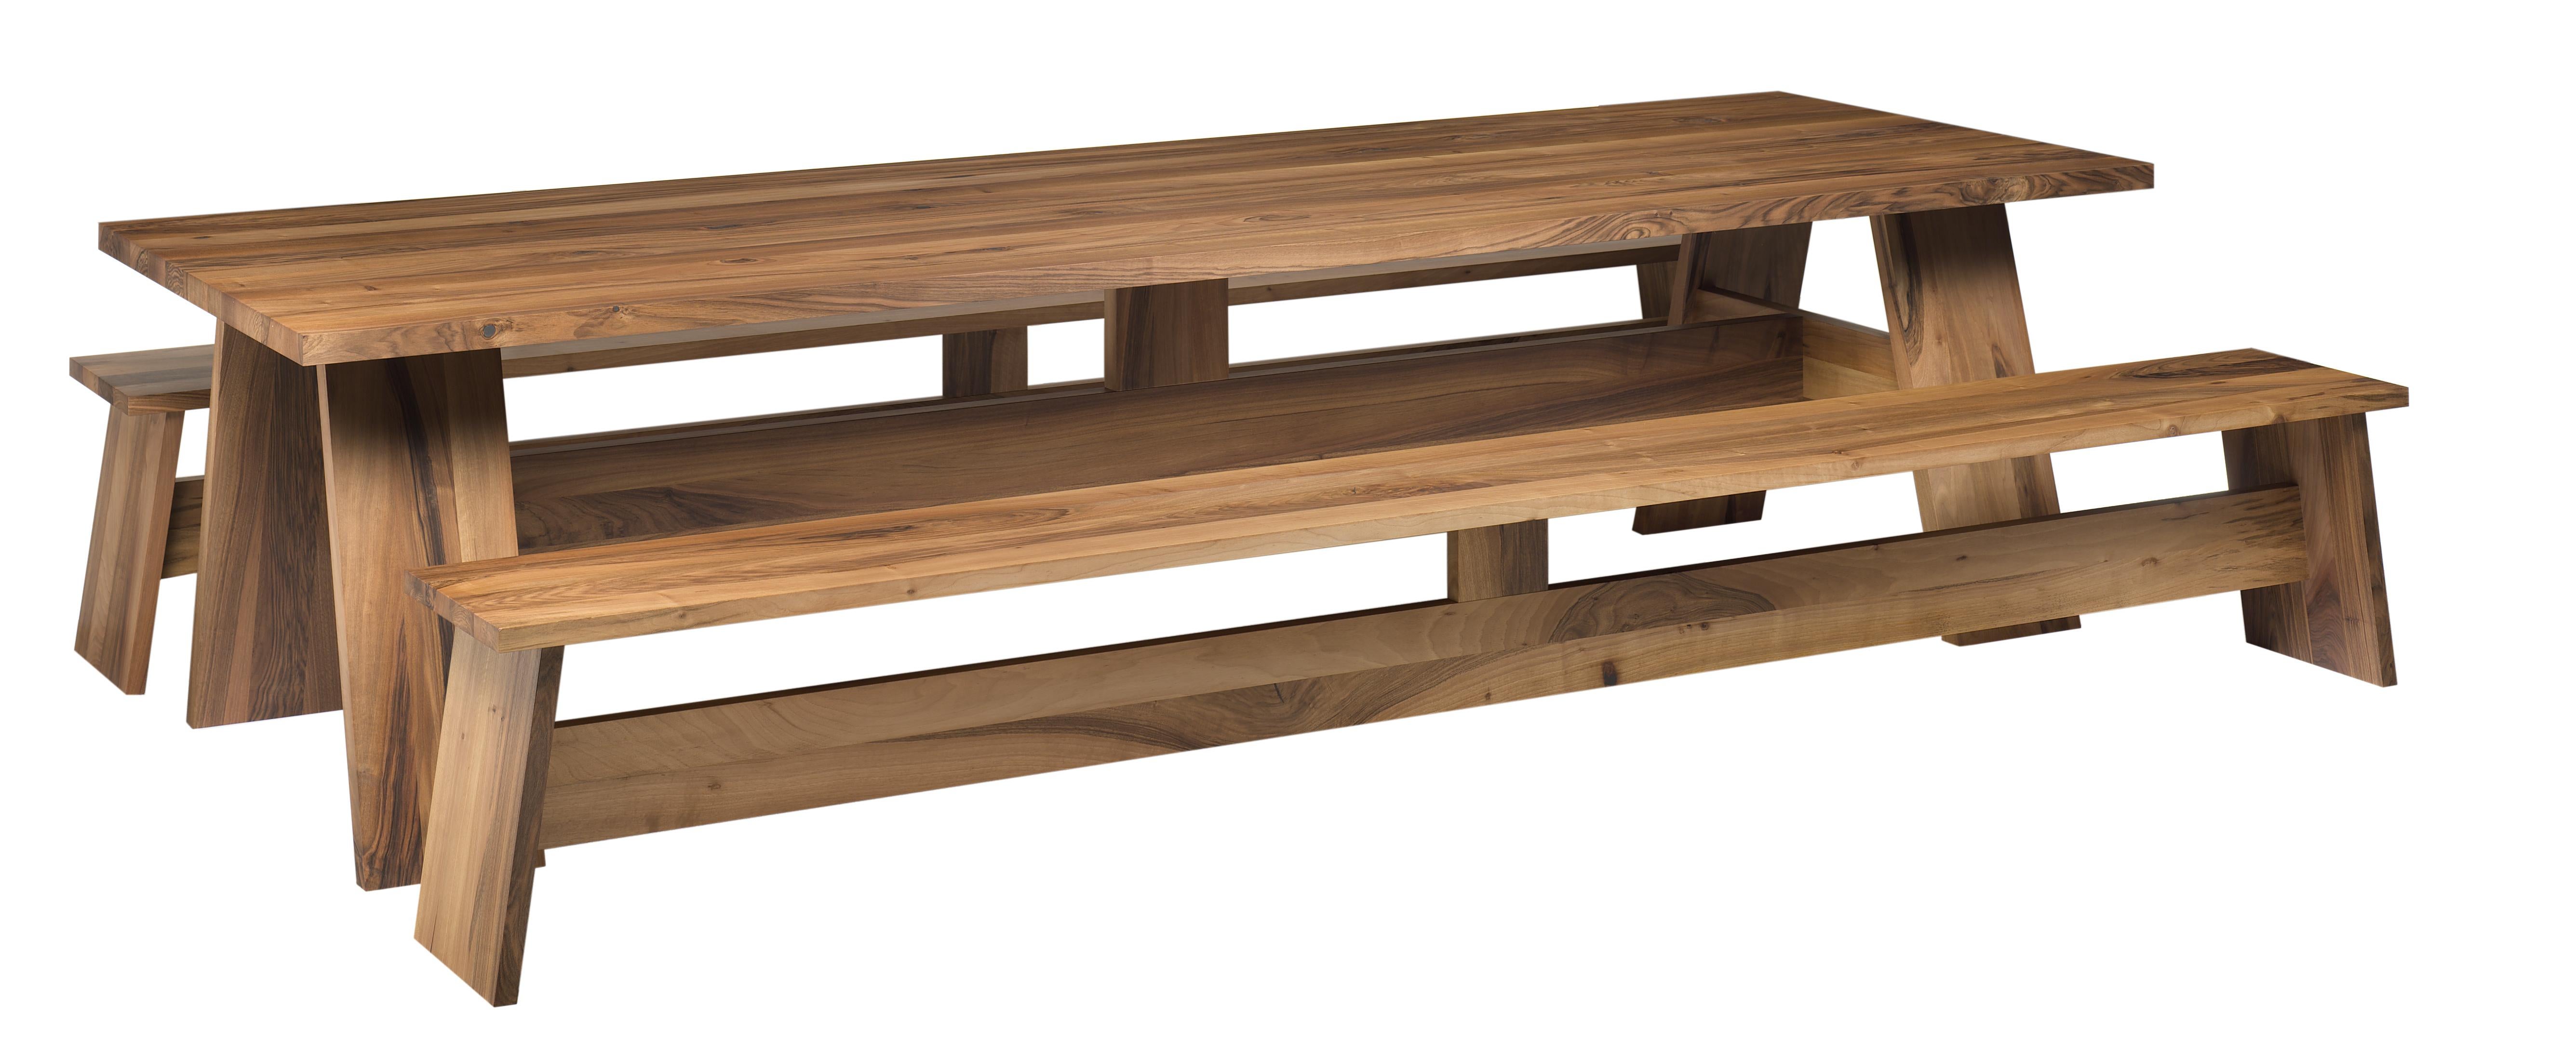 German e15 Fawley Wood Bench by David Chipperfield For Sale